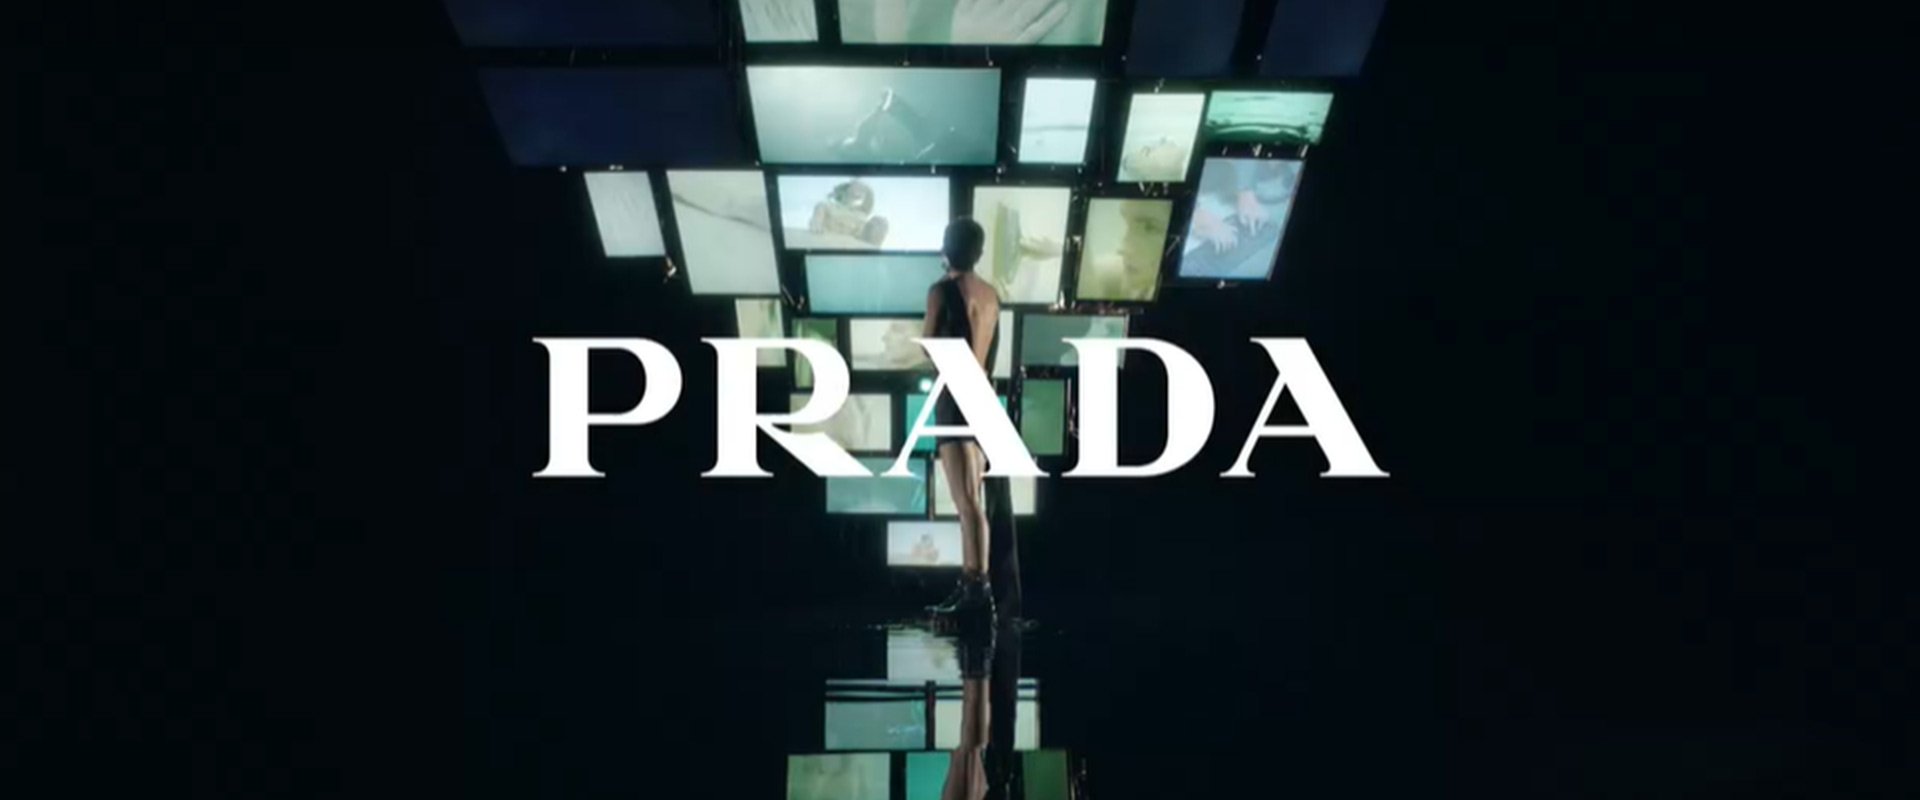 Prada Beauty invites travellers to explore new perspectives in 2023